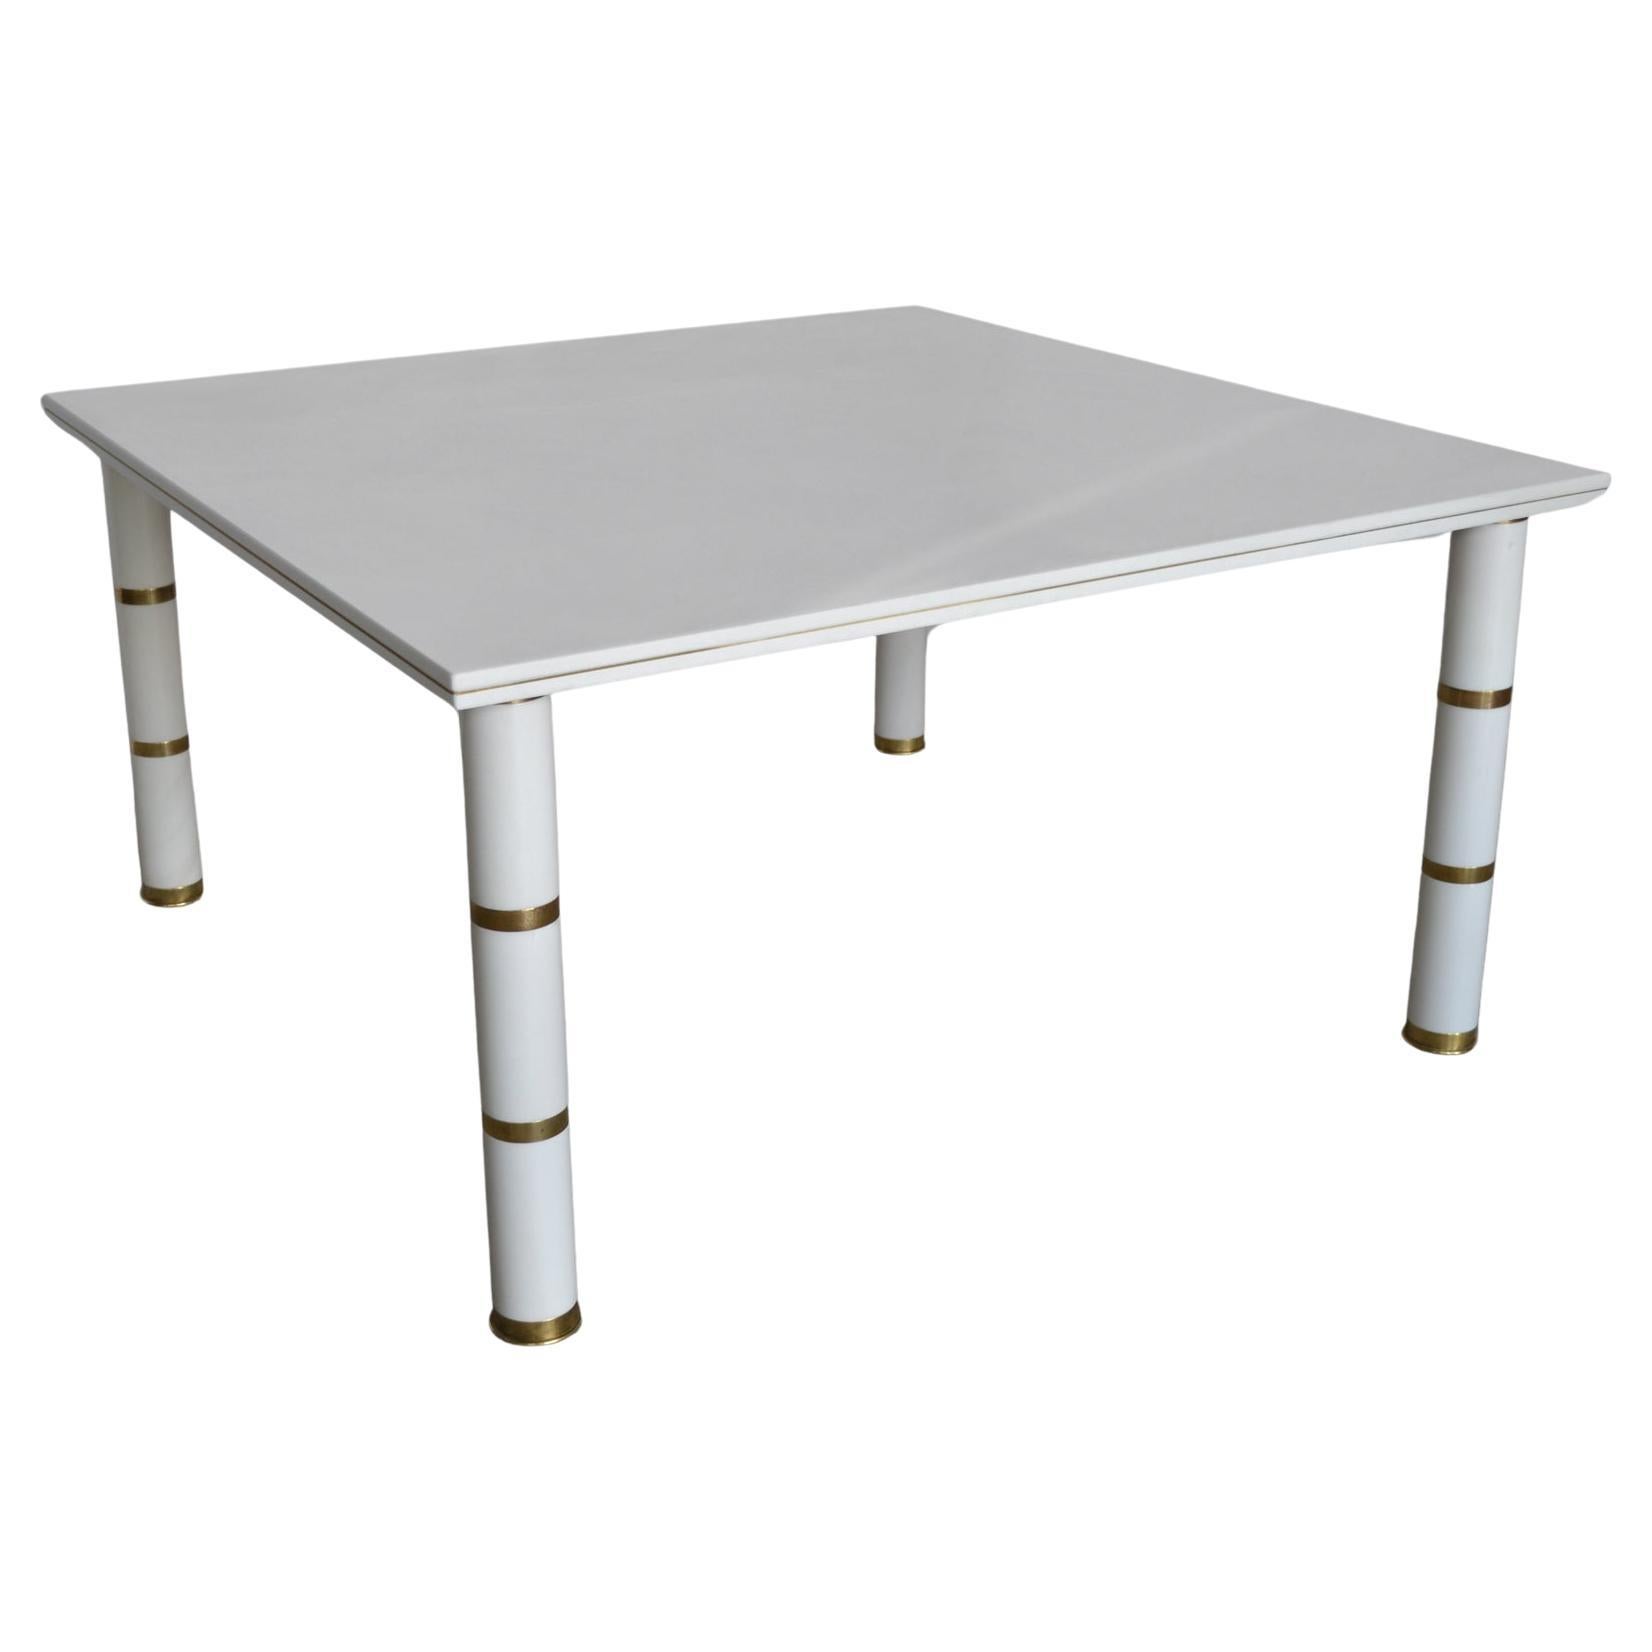 Cupioli made in Italy Dining Room Tables